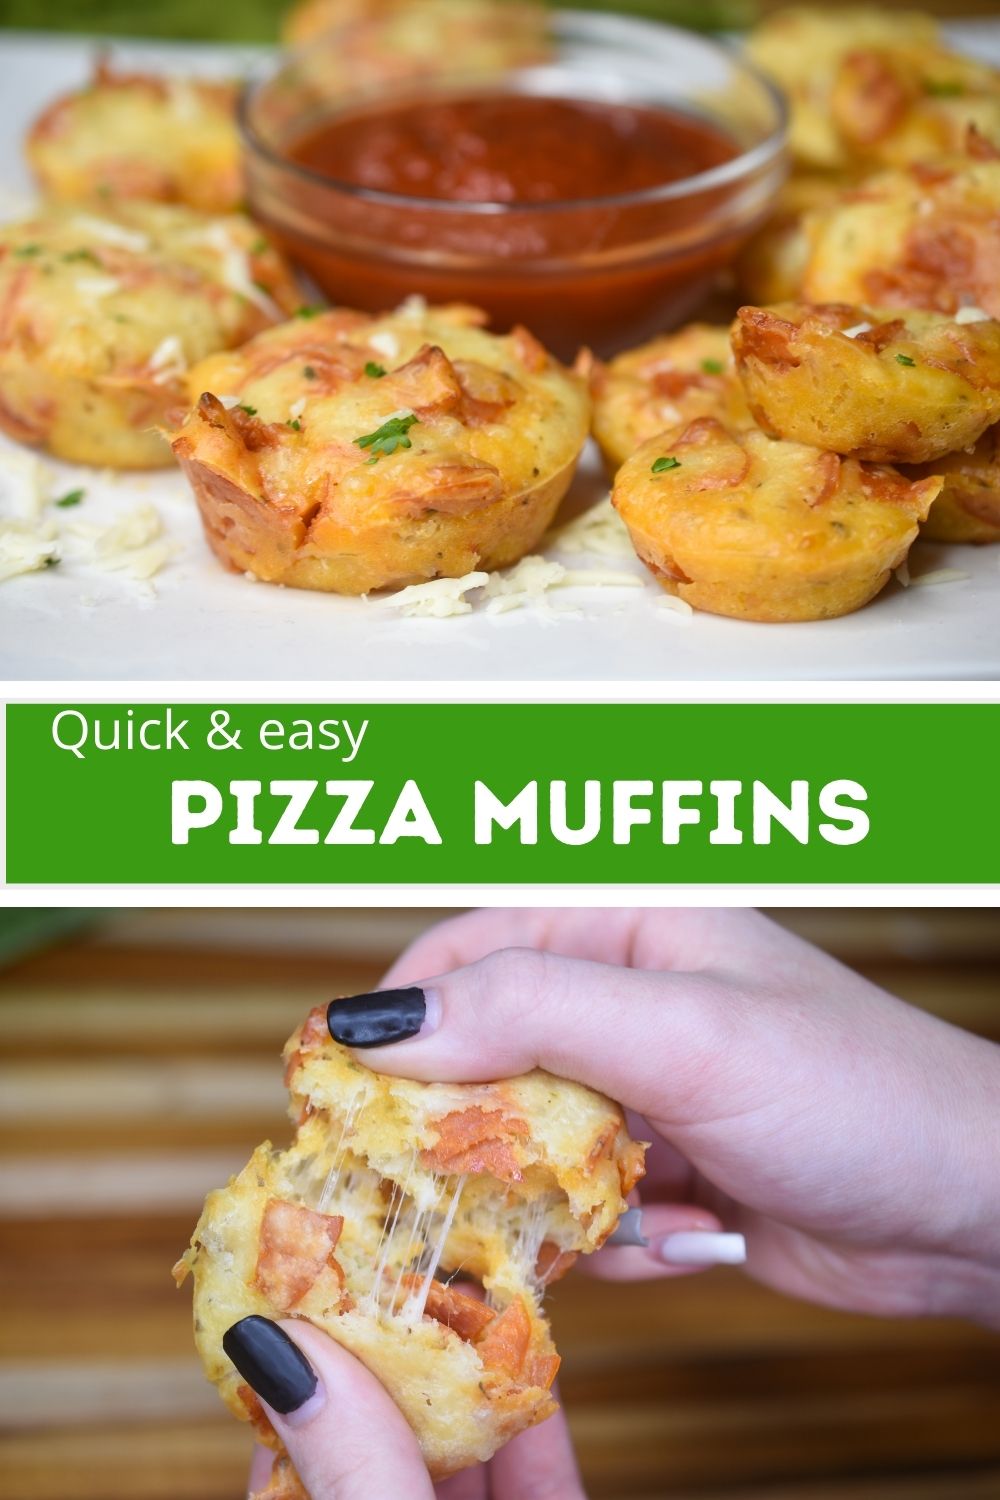 Homemade Pizza Muffins with pepperoni a kids favorite recipe!